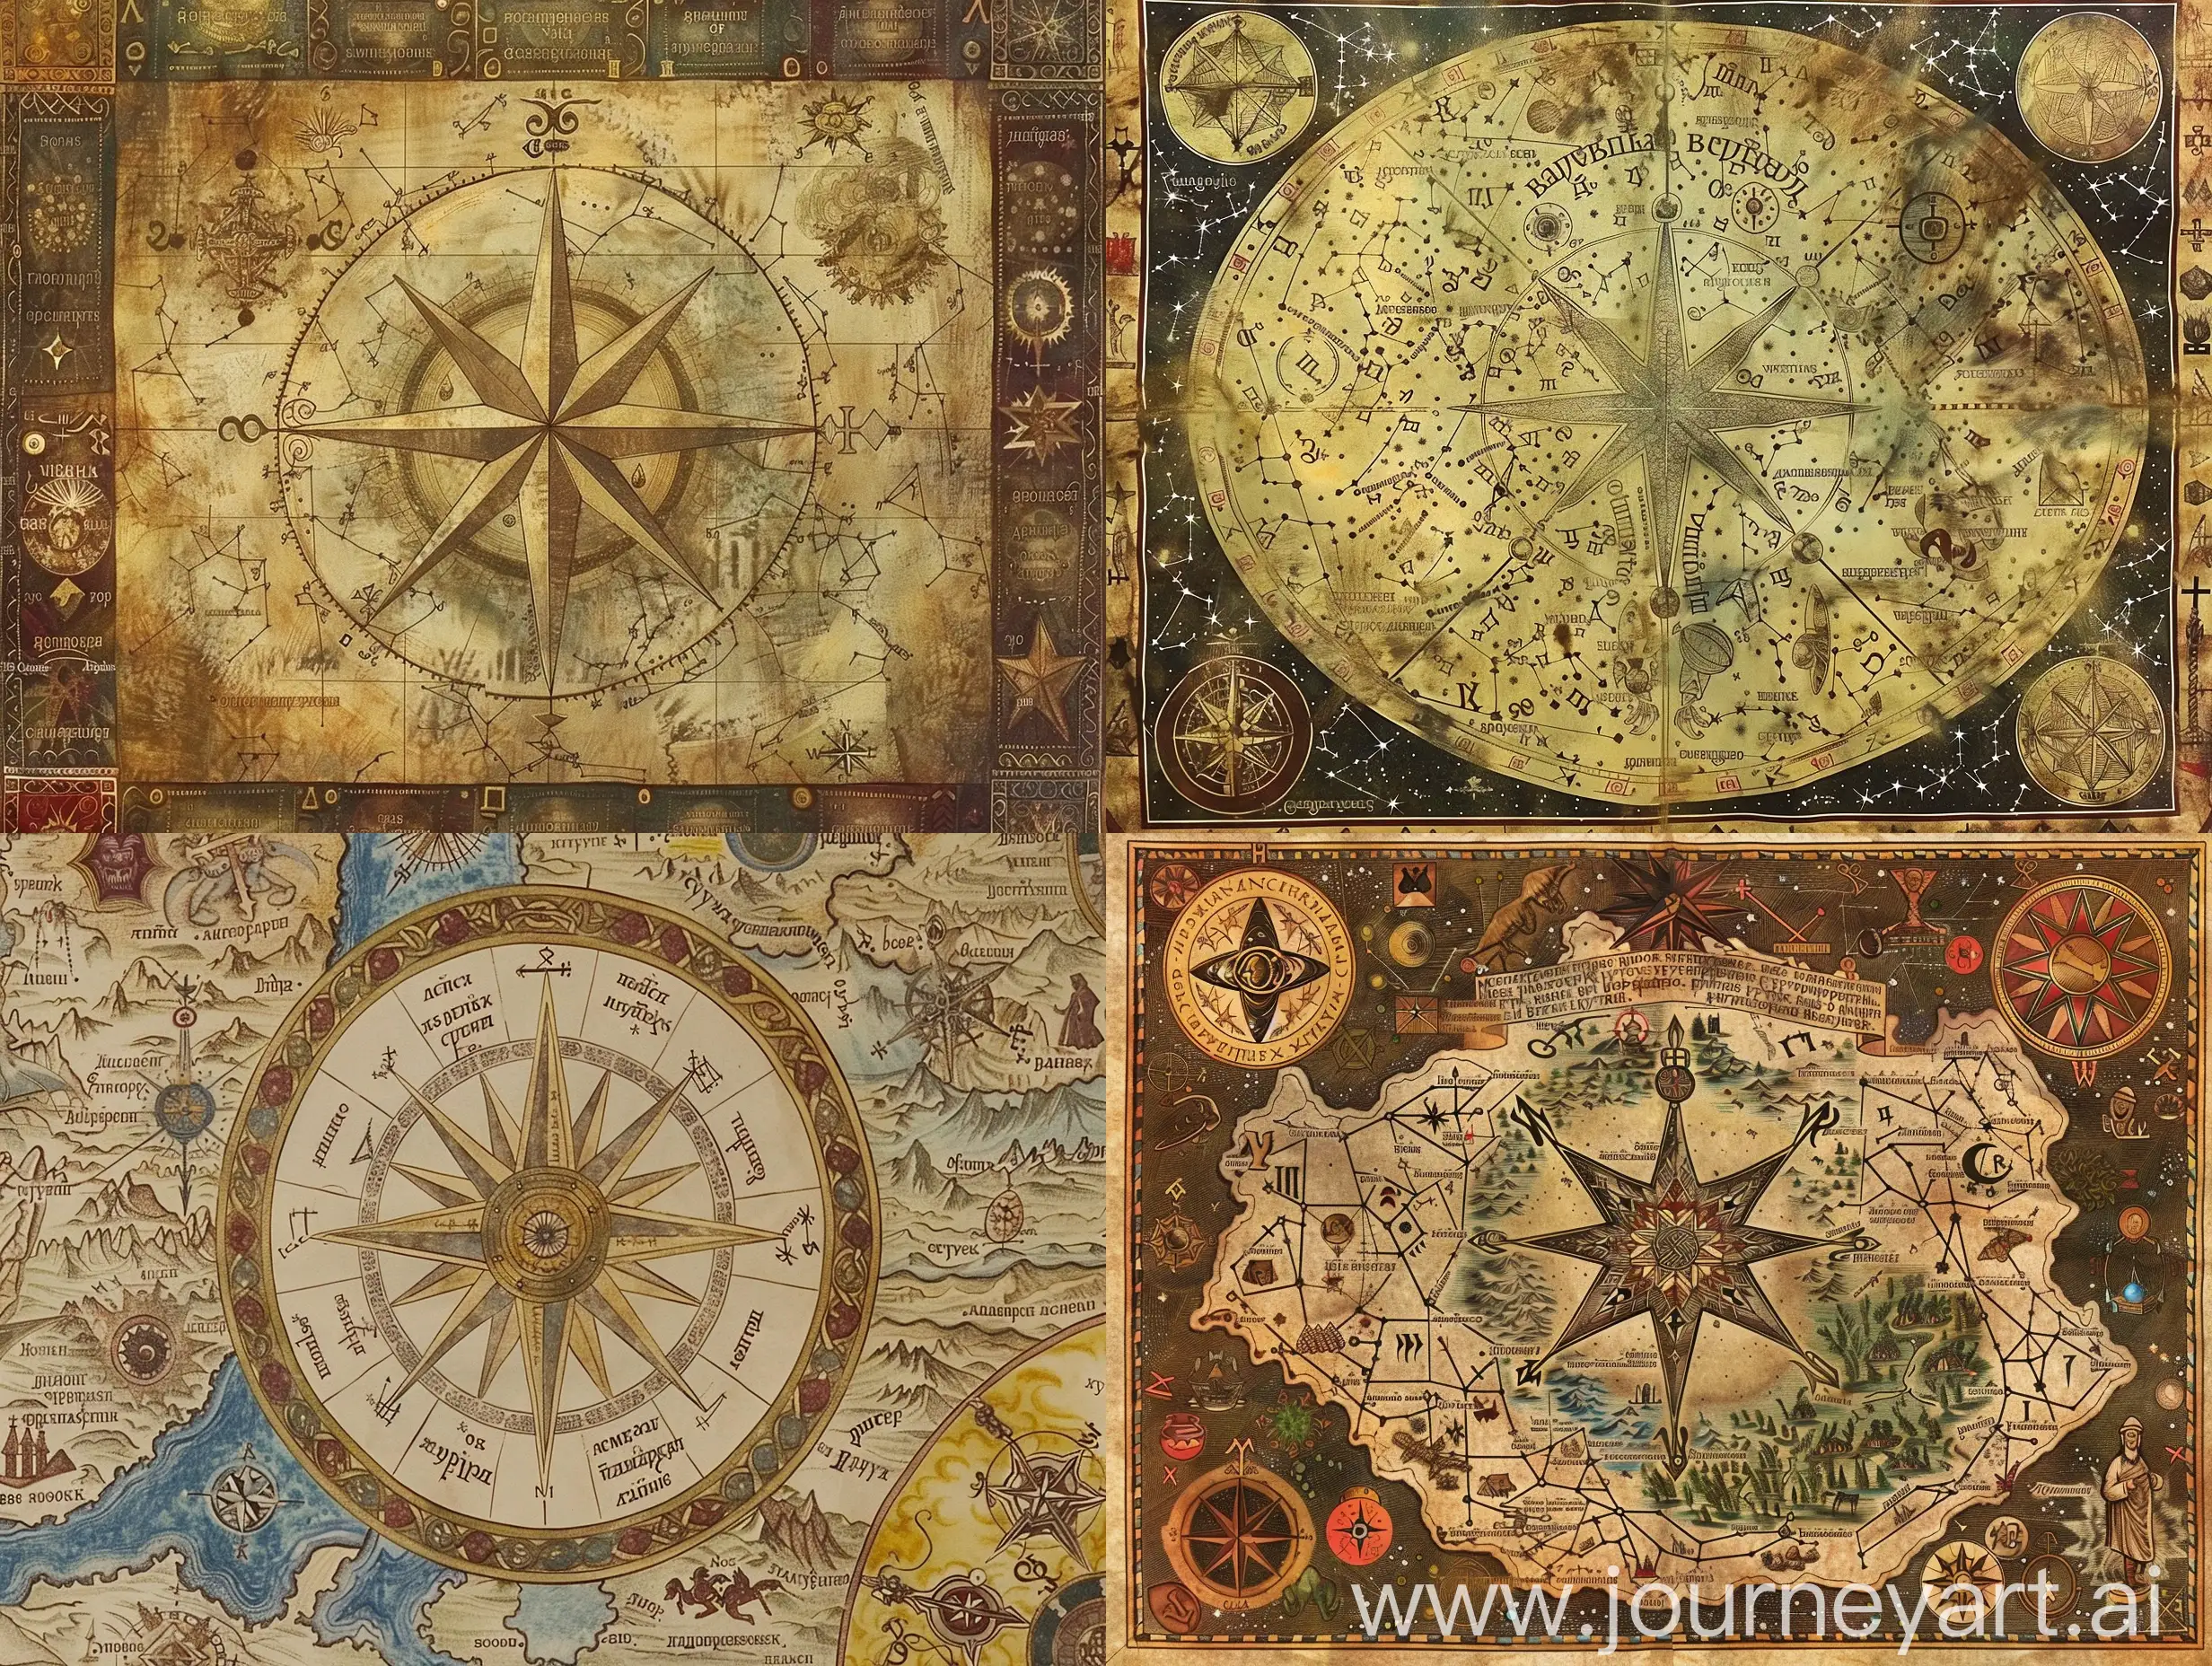 Medieval-Star-Map-with-Cyrillic-Annotations-and-Mystical-Astrological-Symbols